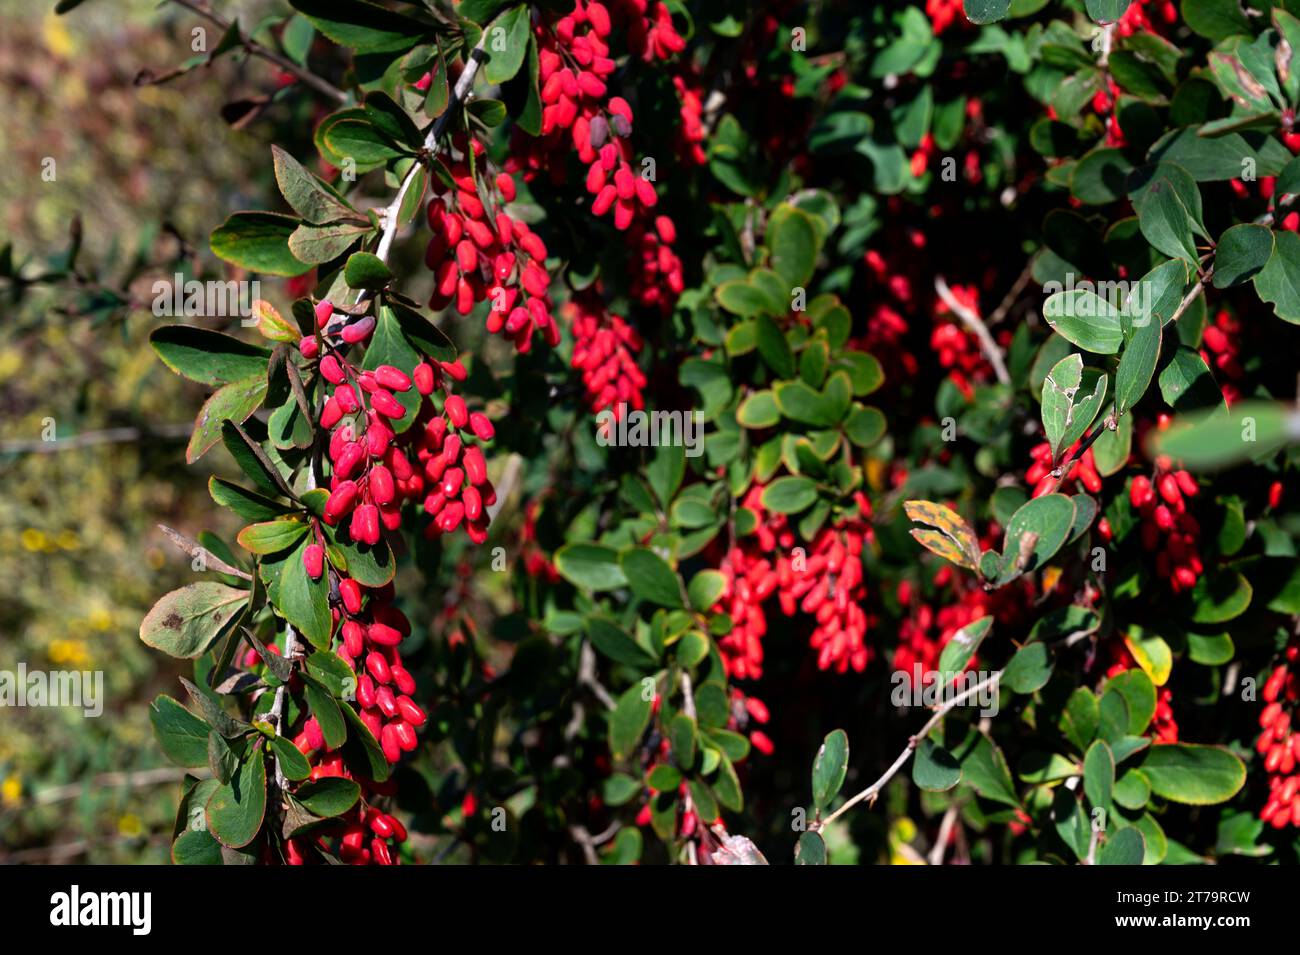 Deciduous shrub, leaves colour well in autumn with bright red berries. Small yellow flowers in late spring. Stock Photo